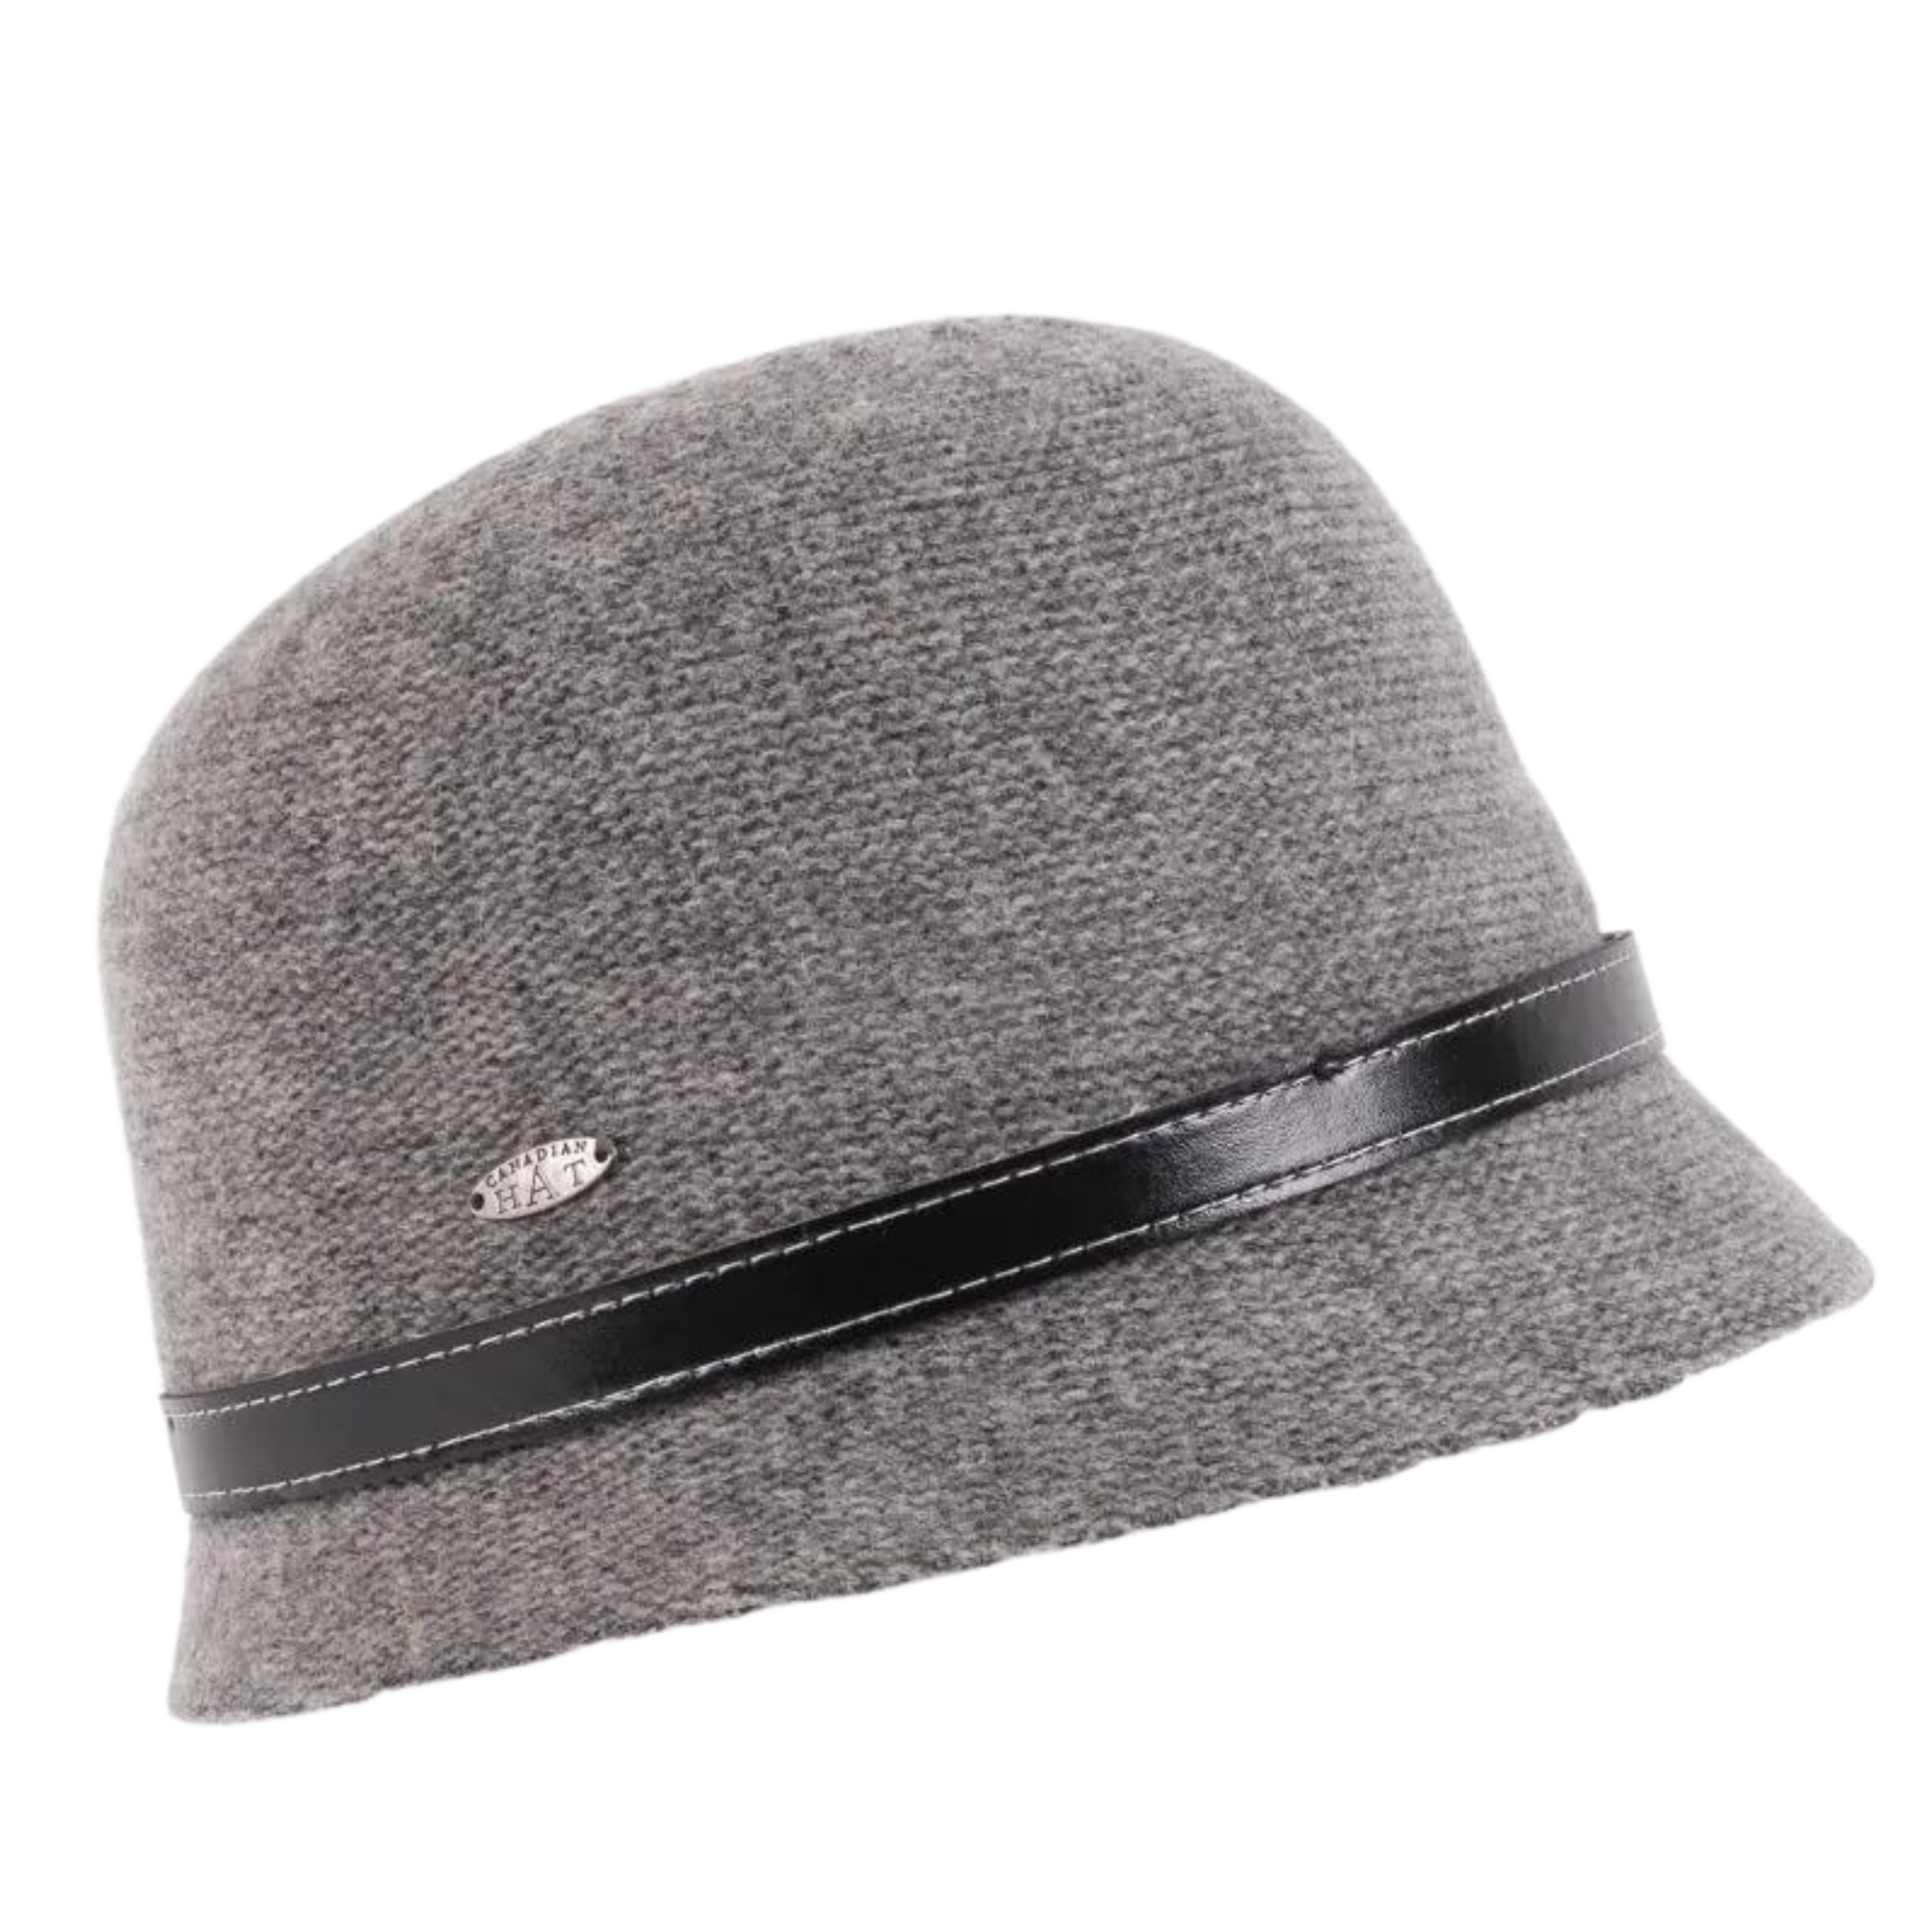 An image of the carmin hat in the colour grey, showing the black leather tie and the canadian hat logo attached on the side.